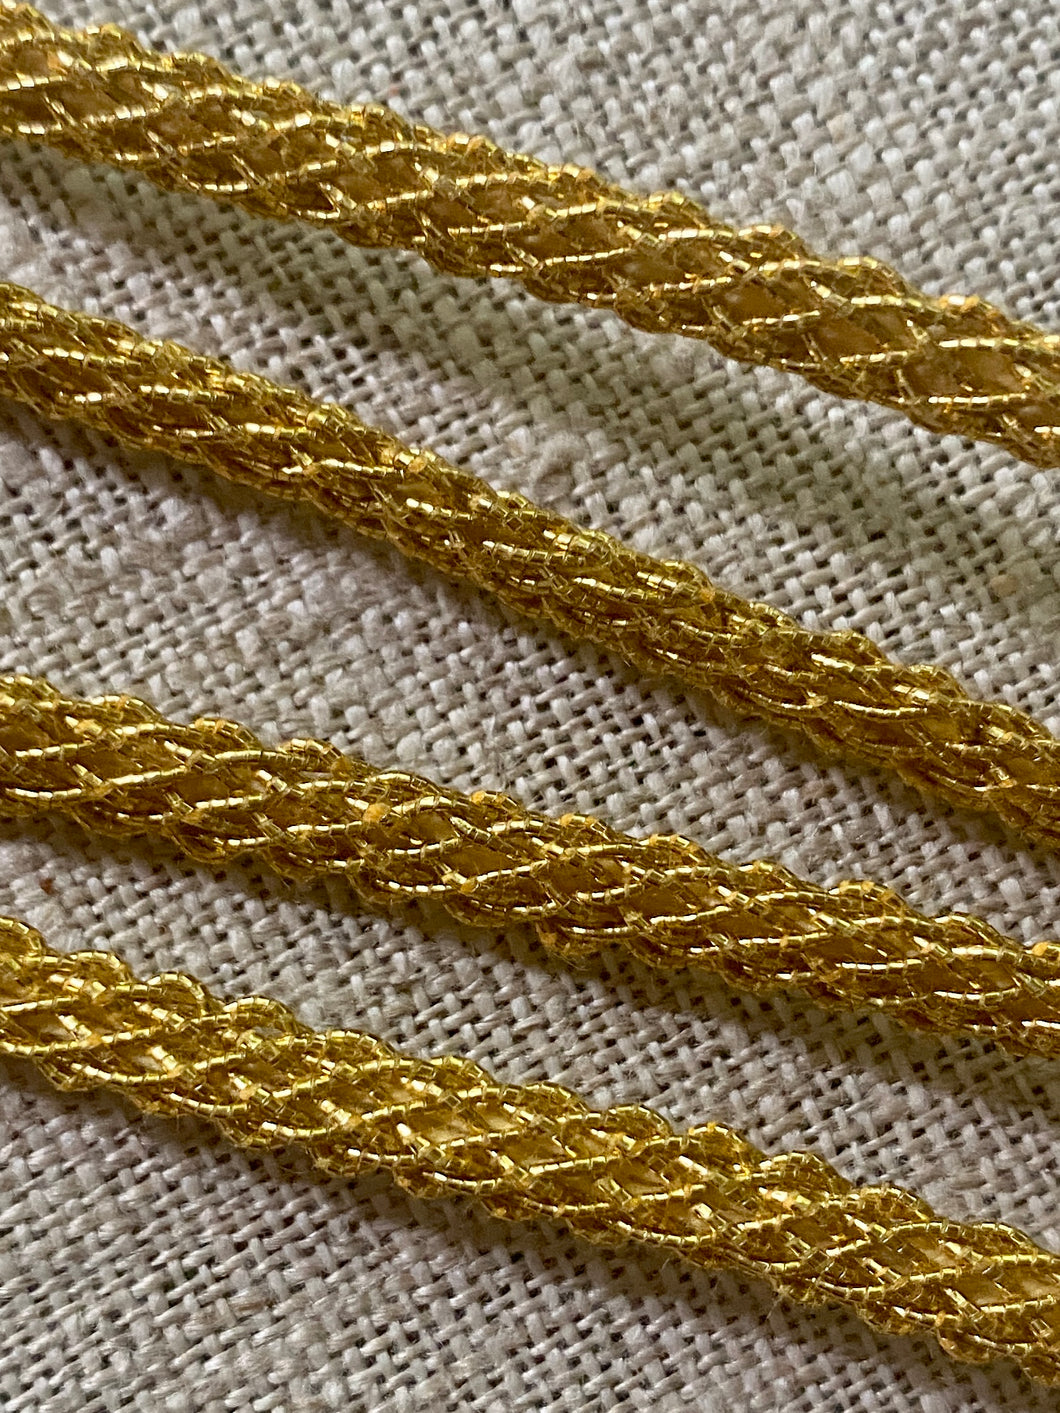 Vintage Gold Netted Cord